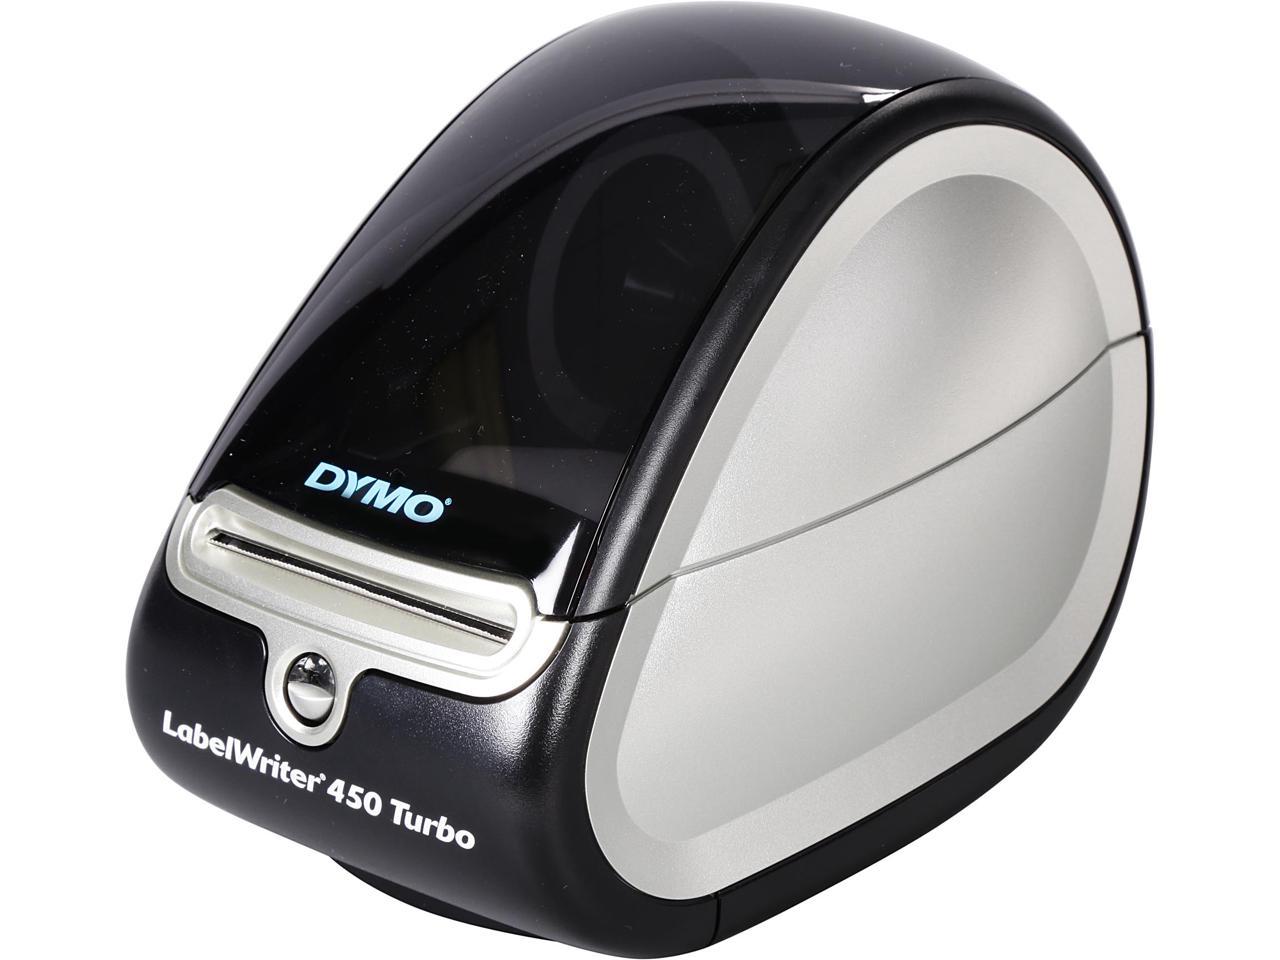 dymo software driver for dymo stamps